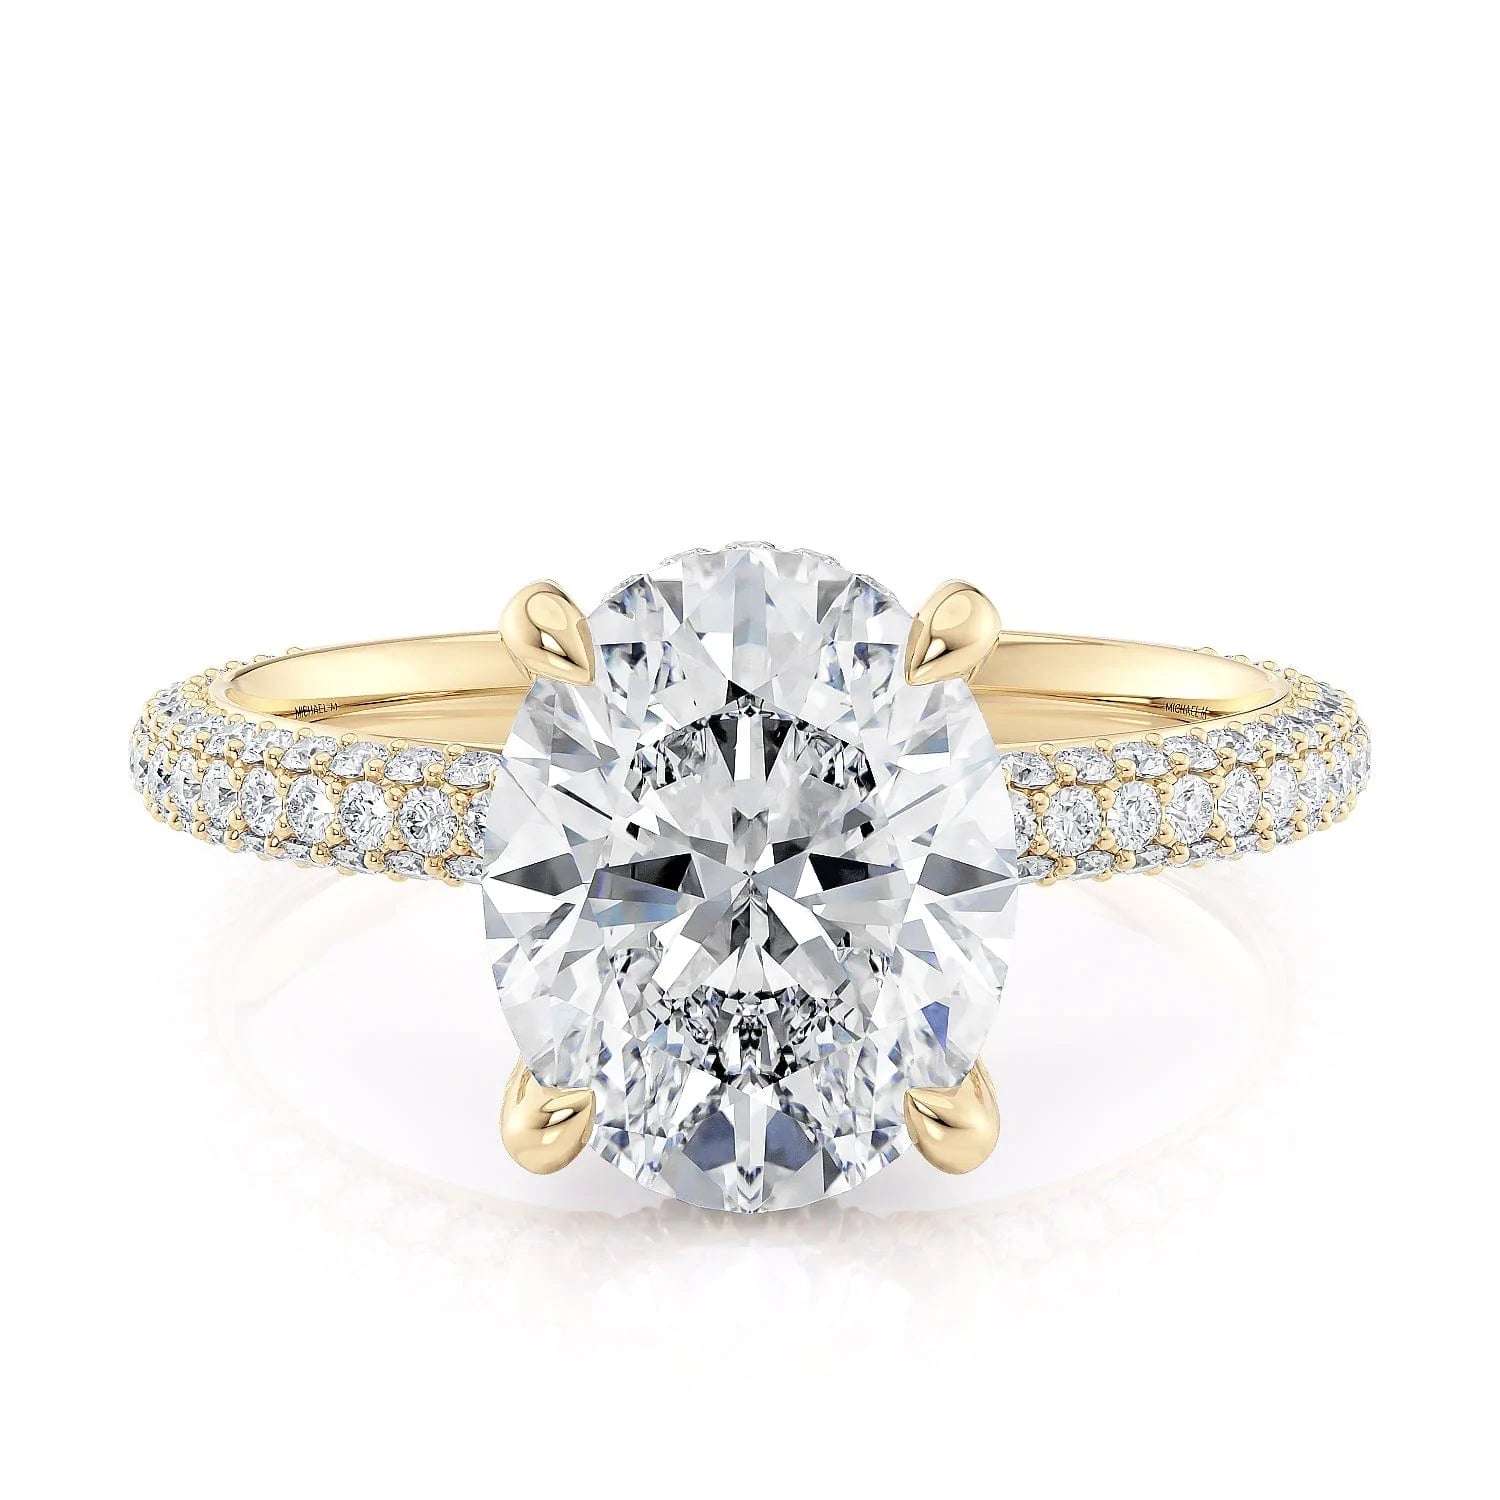 MICHAEL M Engagement Rings 18K Yellow Gold Crown R796-3 R796-3